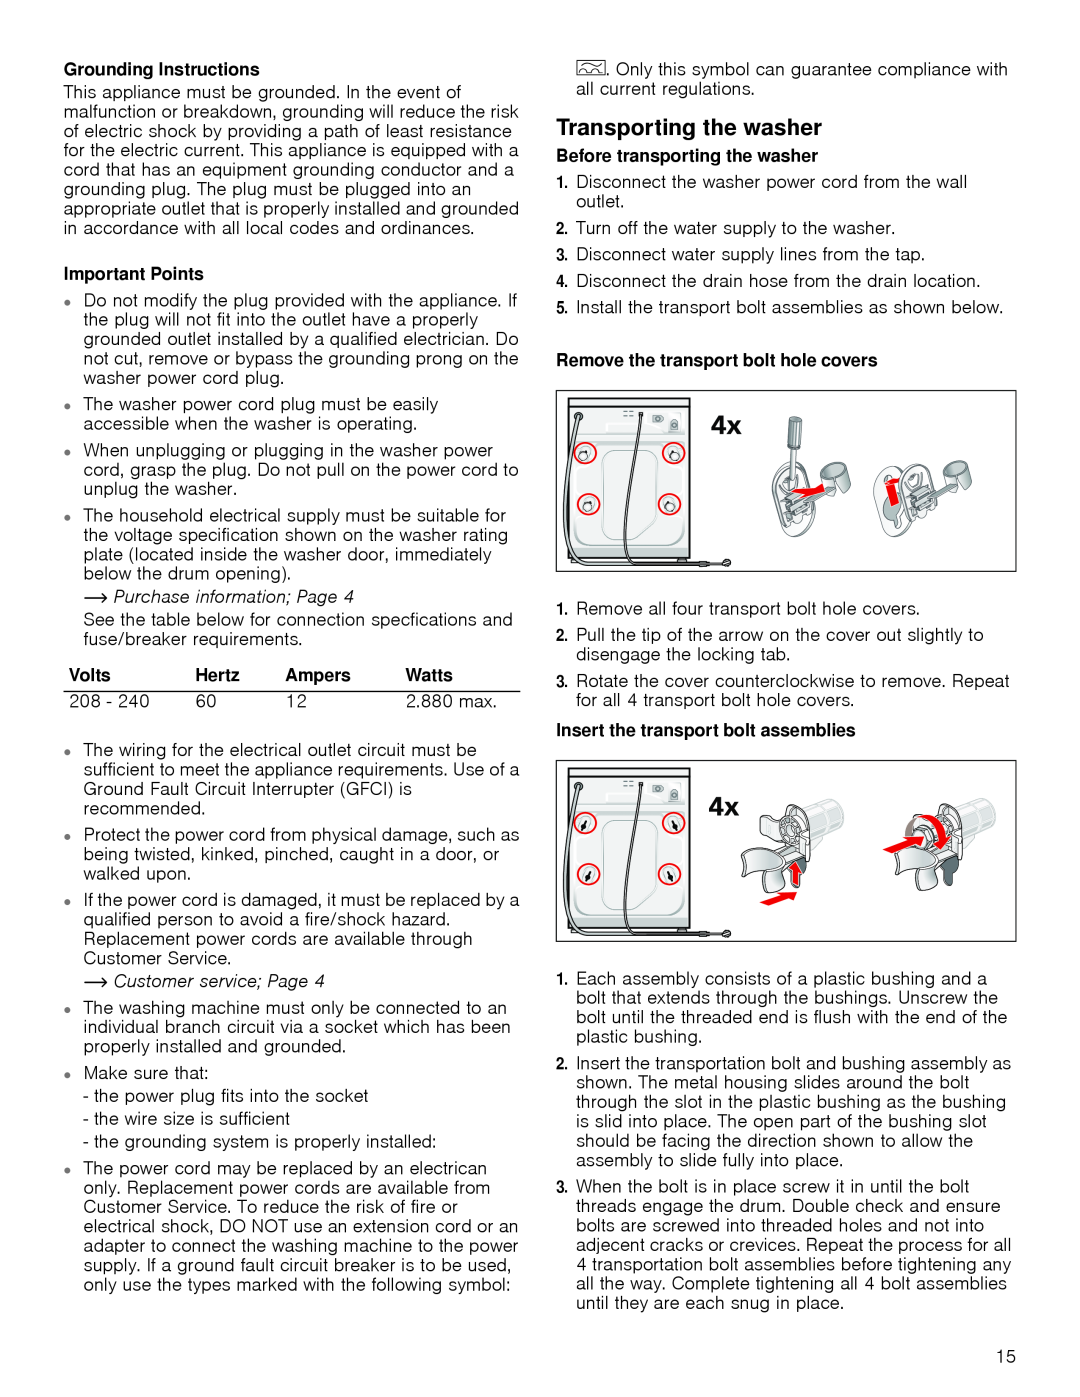 Bosch Appliances WAP24201UC Transporting the washer, Grounding Instructions, Important Points, ~ Purchase information Page 